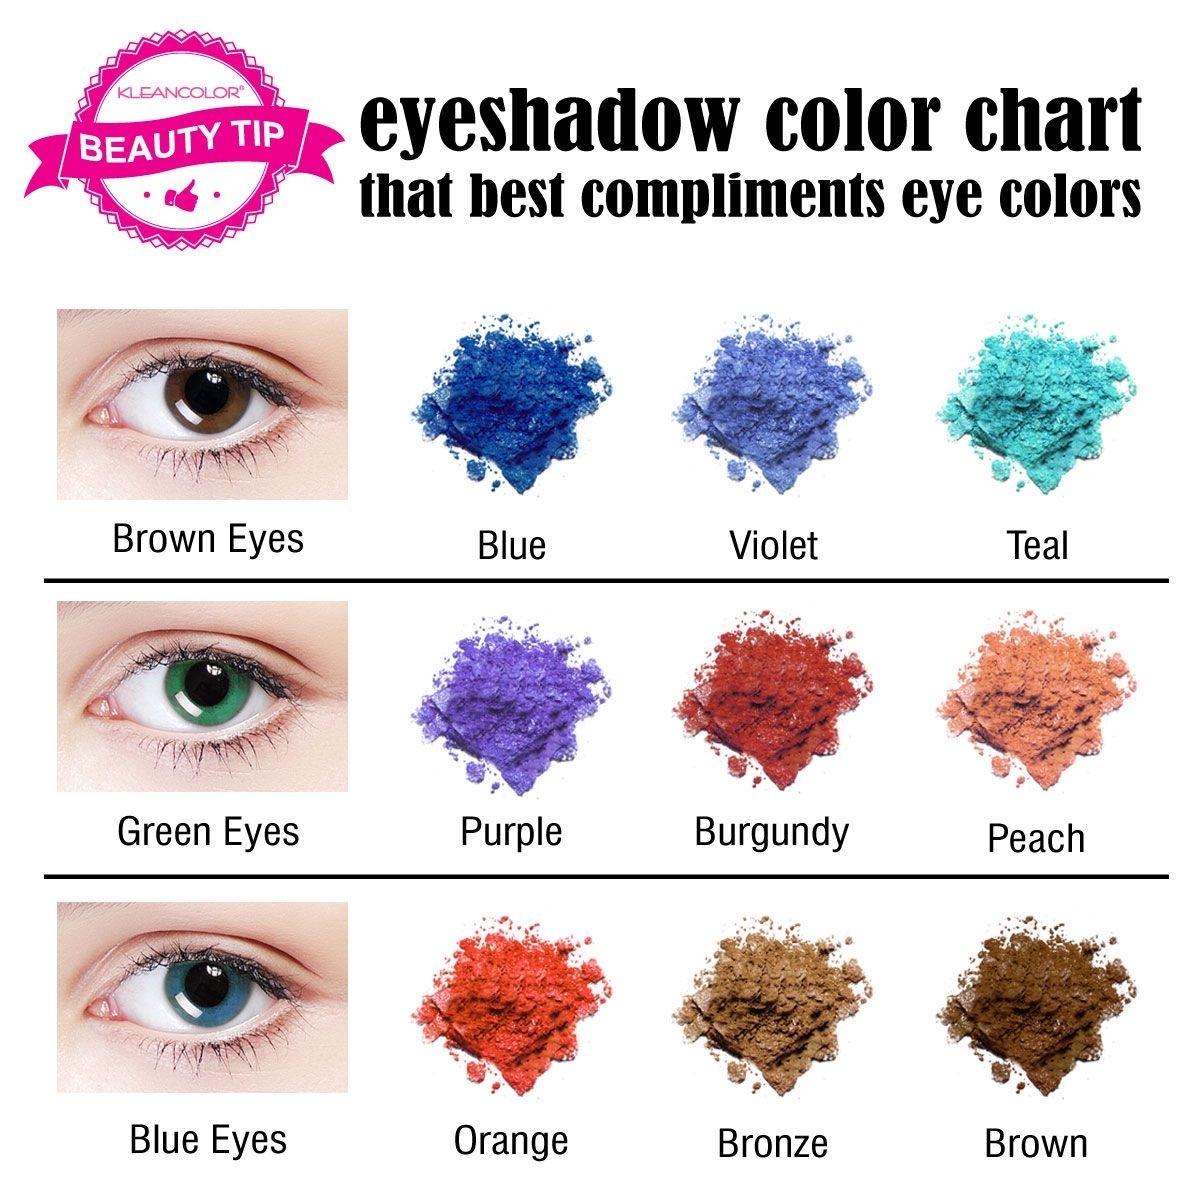 How To Pick The Right Eye Shadow Shades For Your Eye Color with regard to Makeup Color Wheel For Blue Eyes